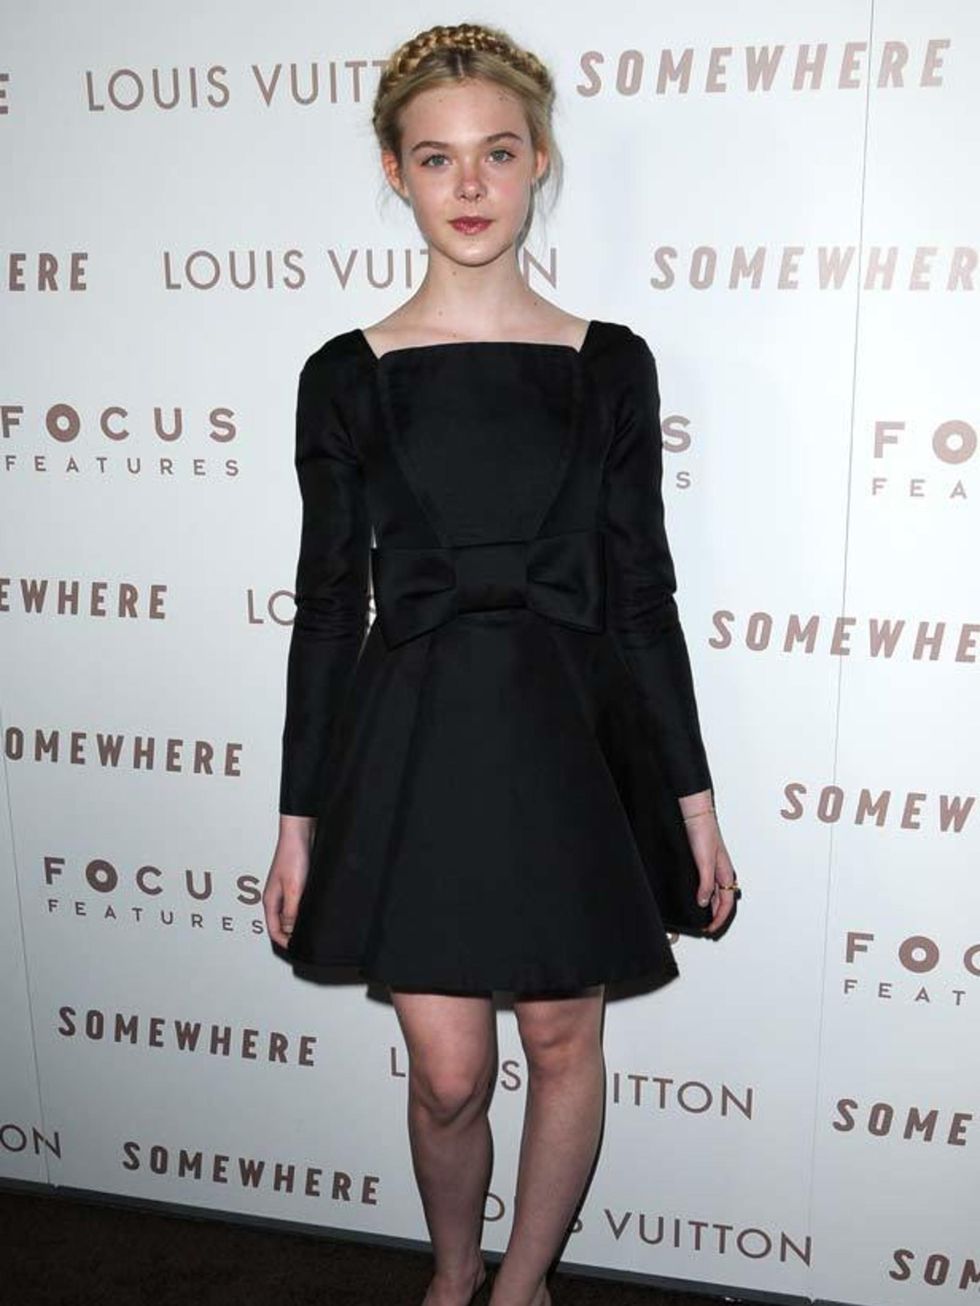 <p>Elle Fanning in <a href="http://www.elleuk.com/catwalk/collections/valentino/spring-summer-2011/collection">Valentino</a> Couture at the 'Somewhere' premiere in Los Angeles, 8 December 2010</p>